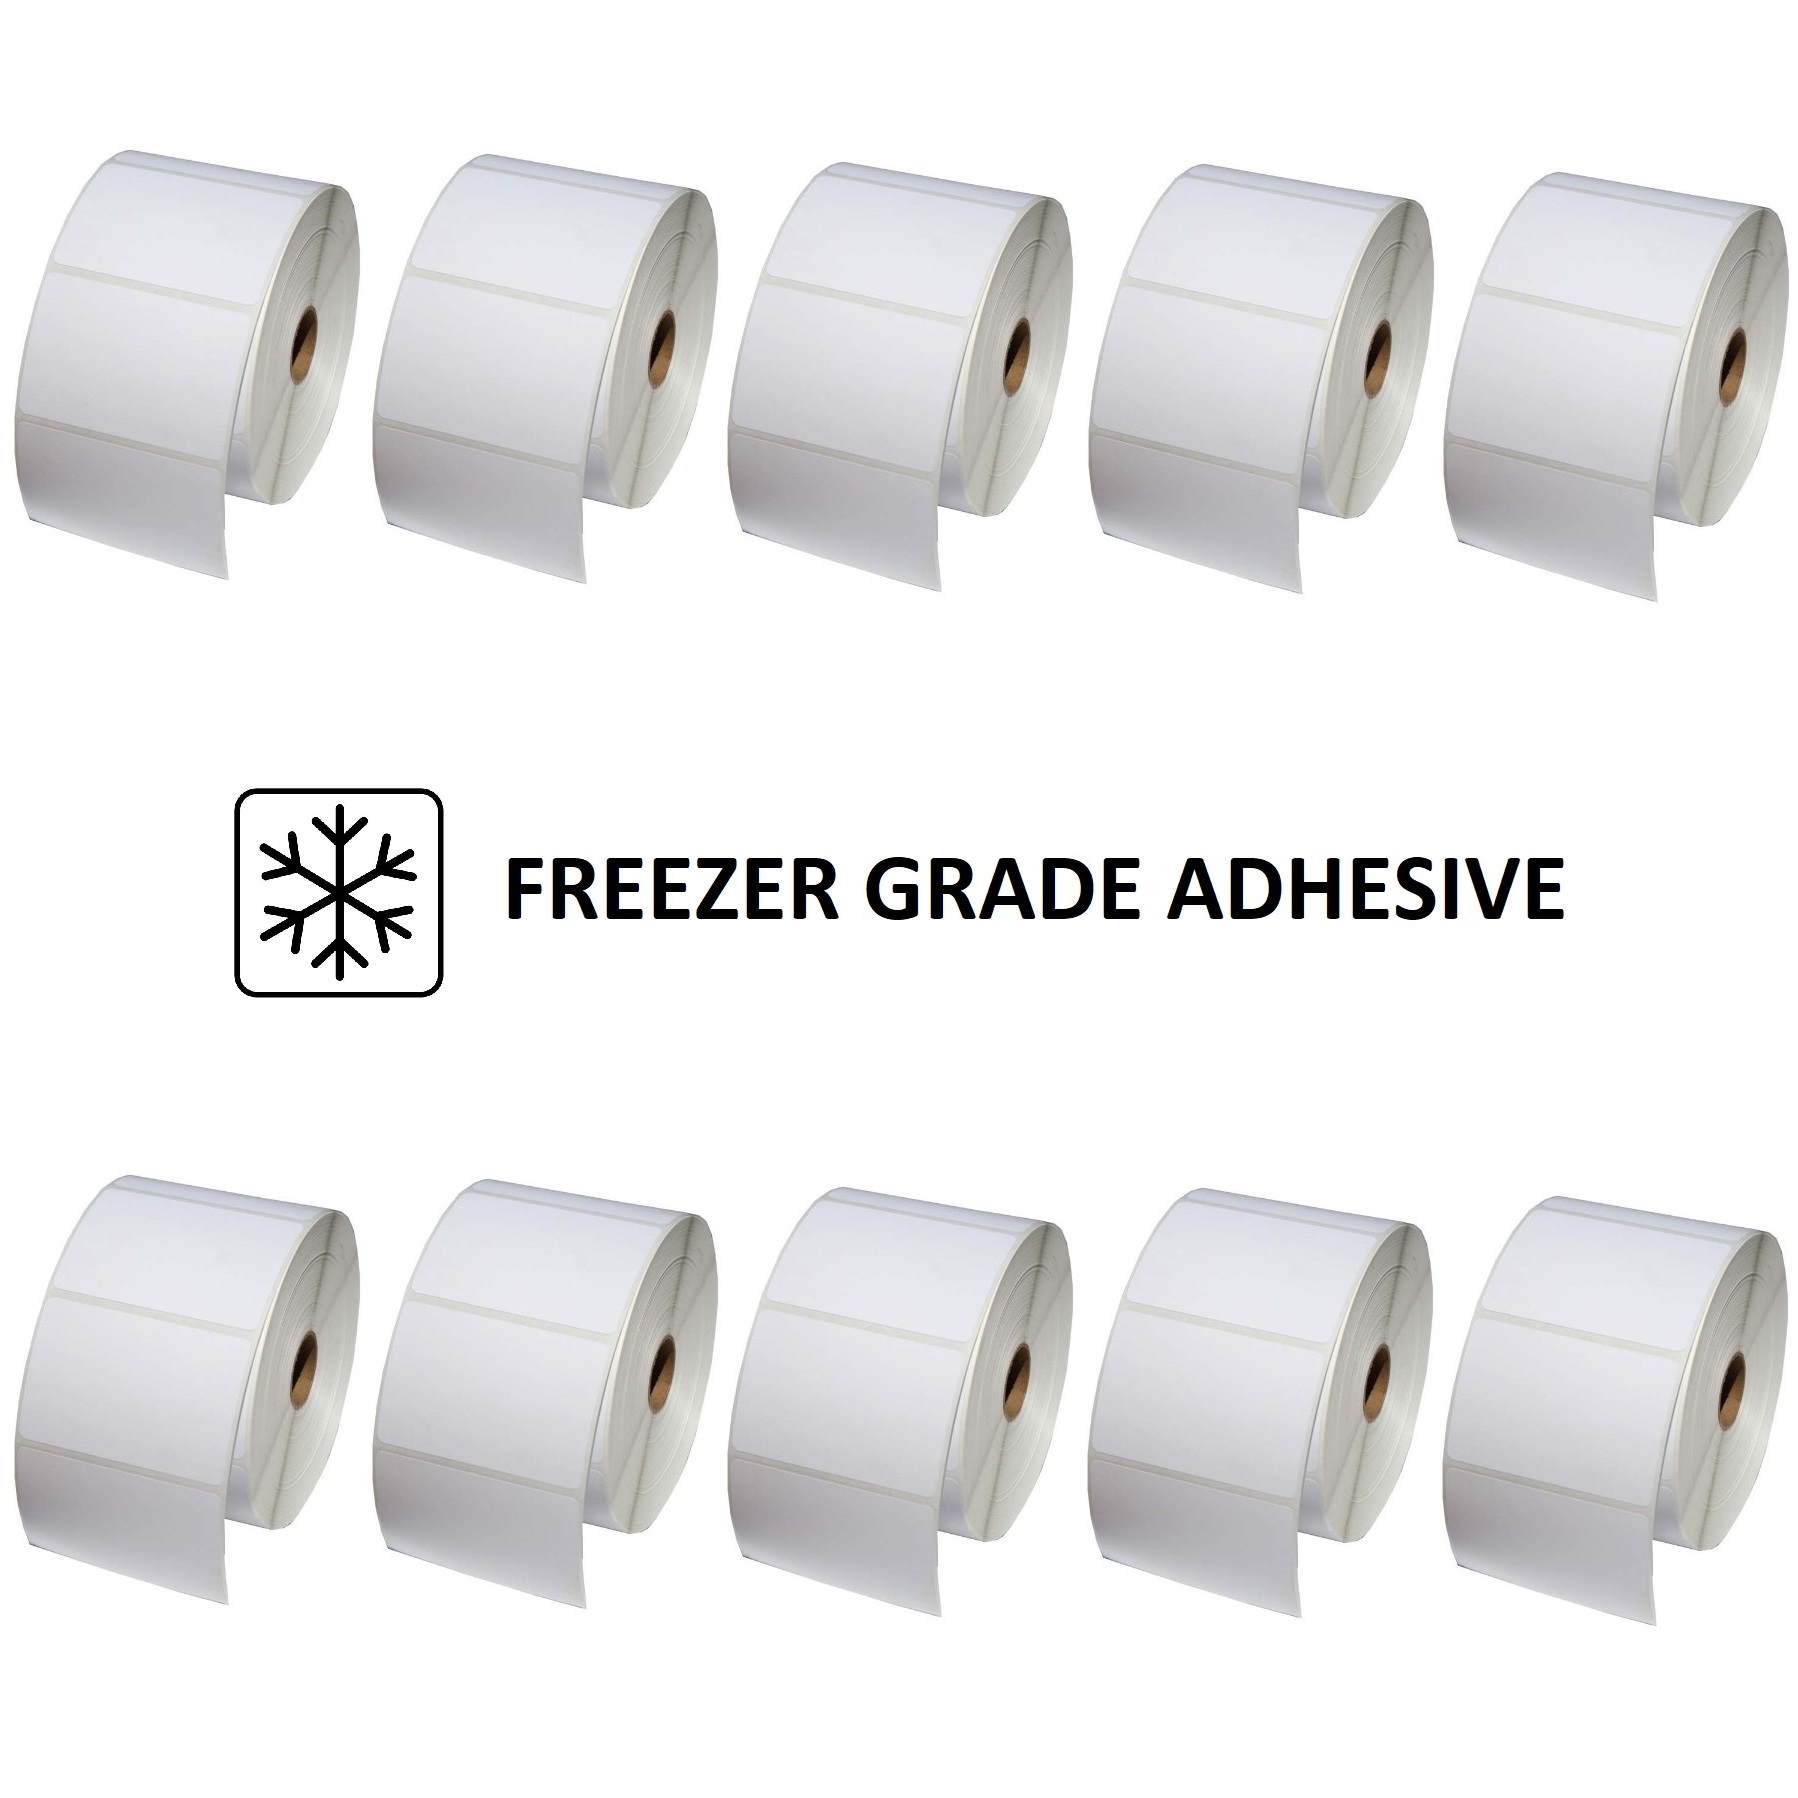 View 100x65 Freezer Direct Thermal Labels with 38mm Core - 10 Rolls